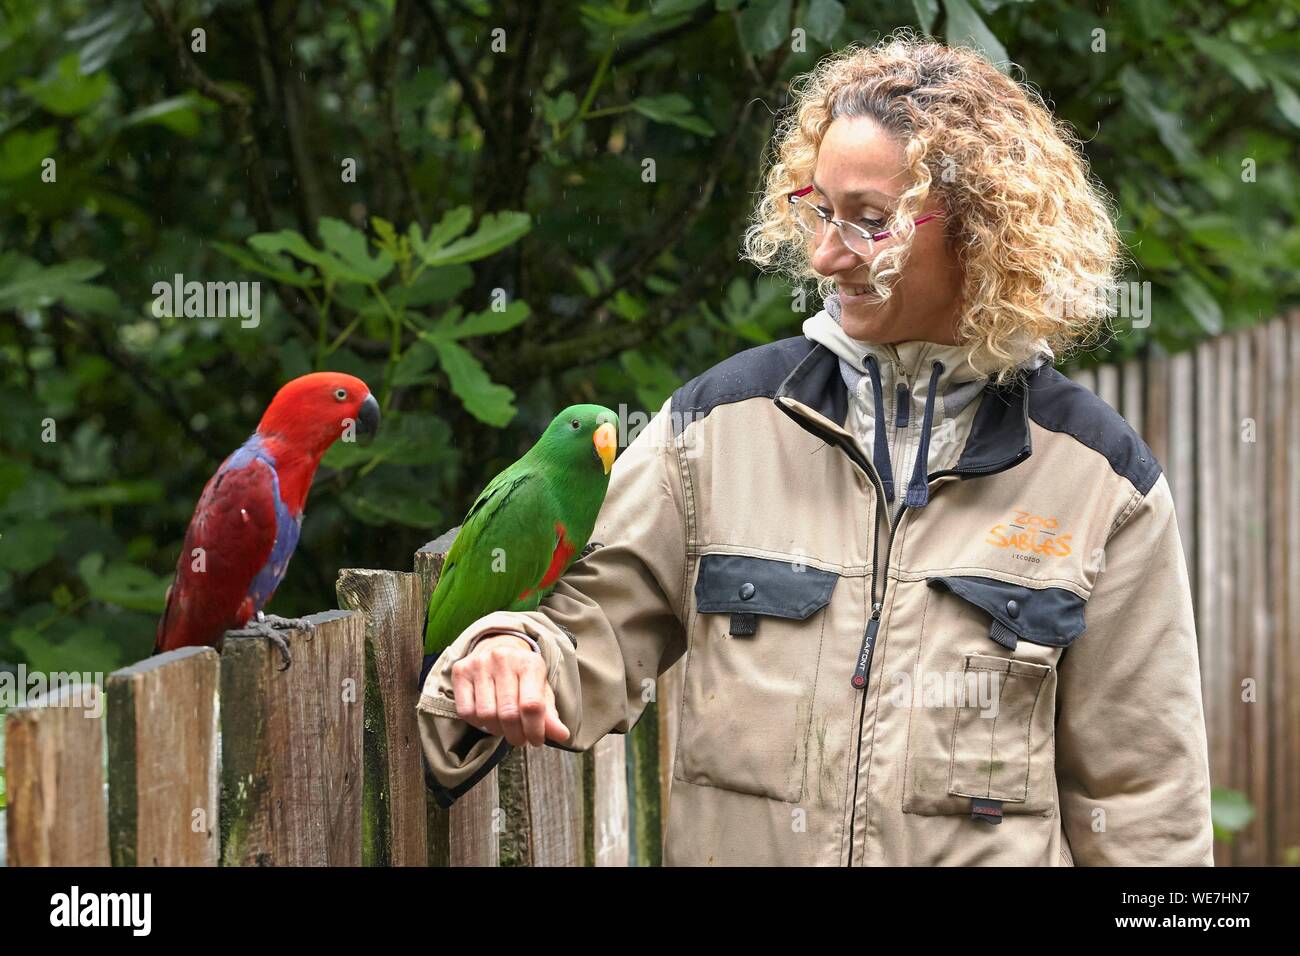 France, Vendee, Les Sables d'Olonne, Oceania Aviary, Sandrine Silhol, Director of Zoo des Sables in the presence of lorikeets Stock Photo